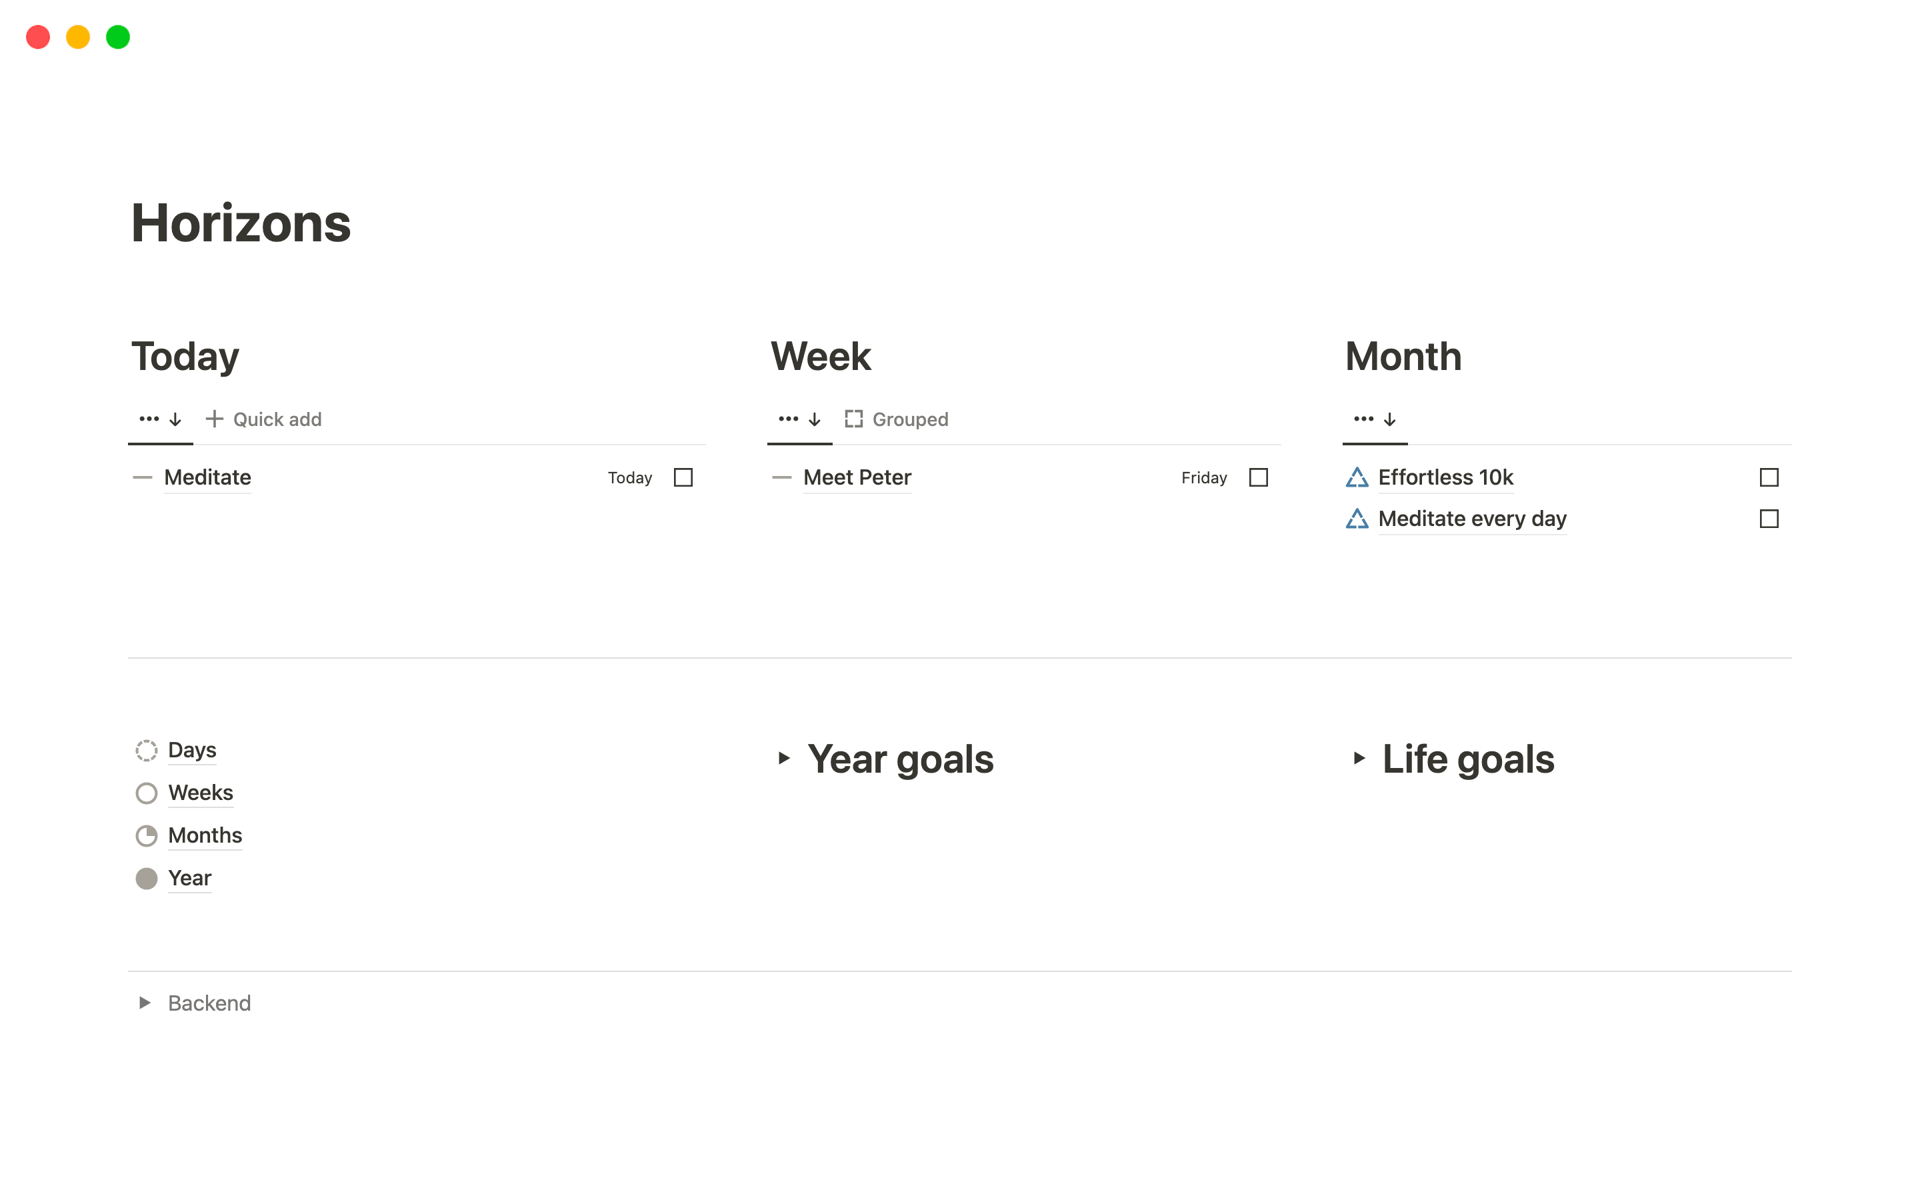 Horizons is a minimalist task manager designed for efficient organization, goal tracking, and seamless planning.